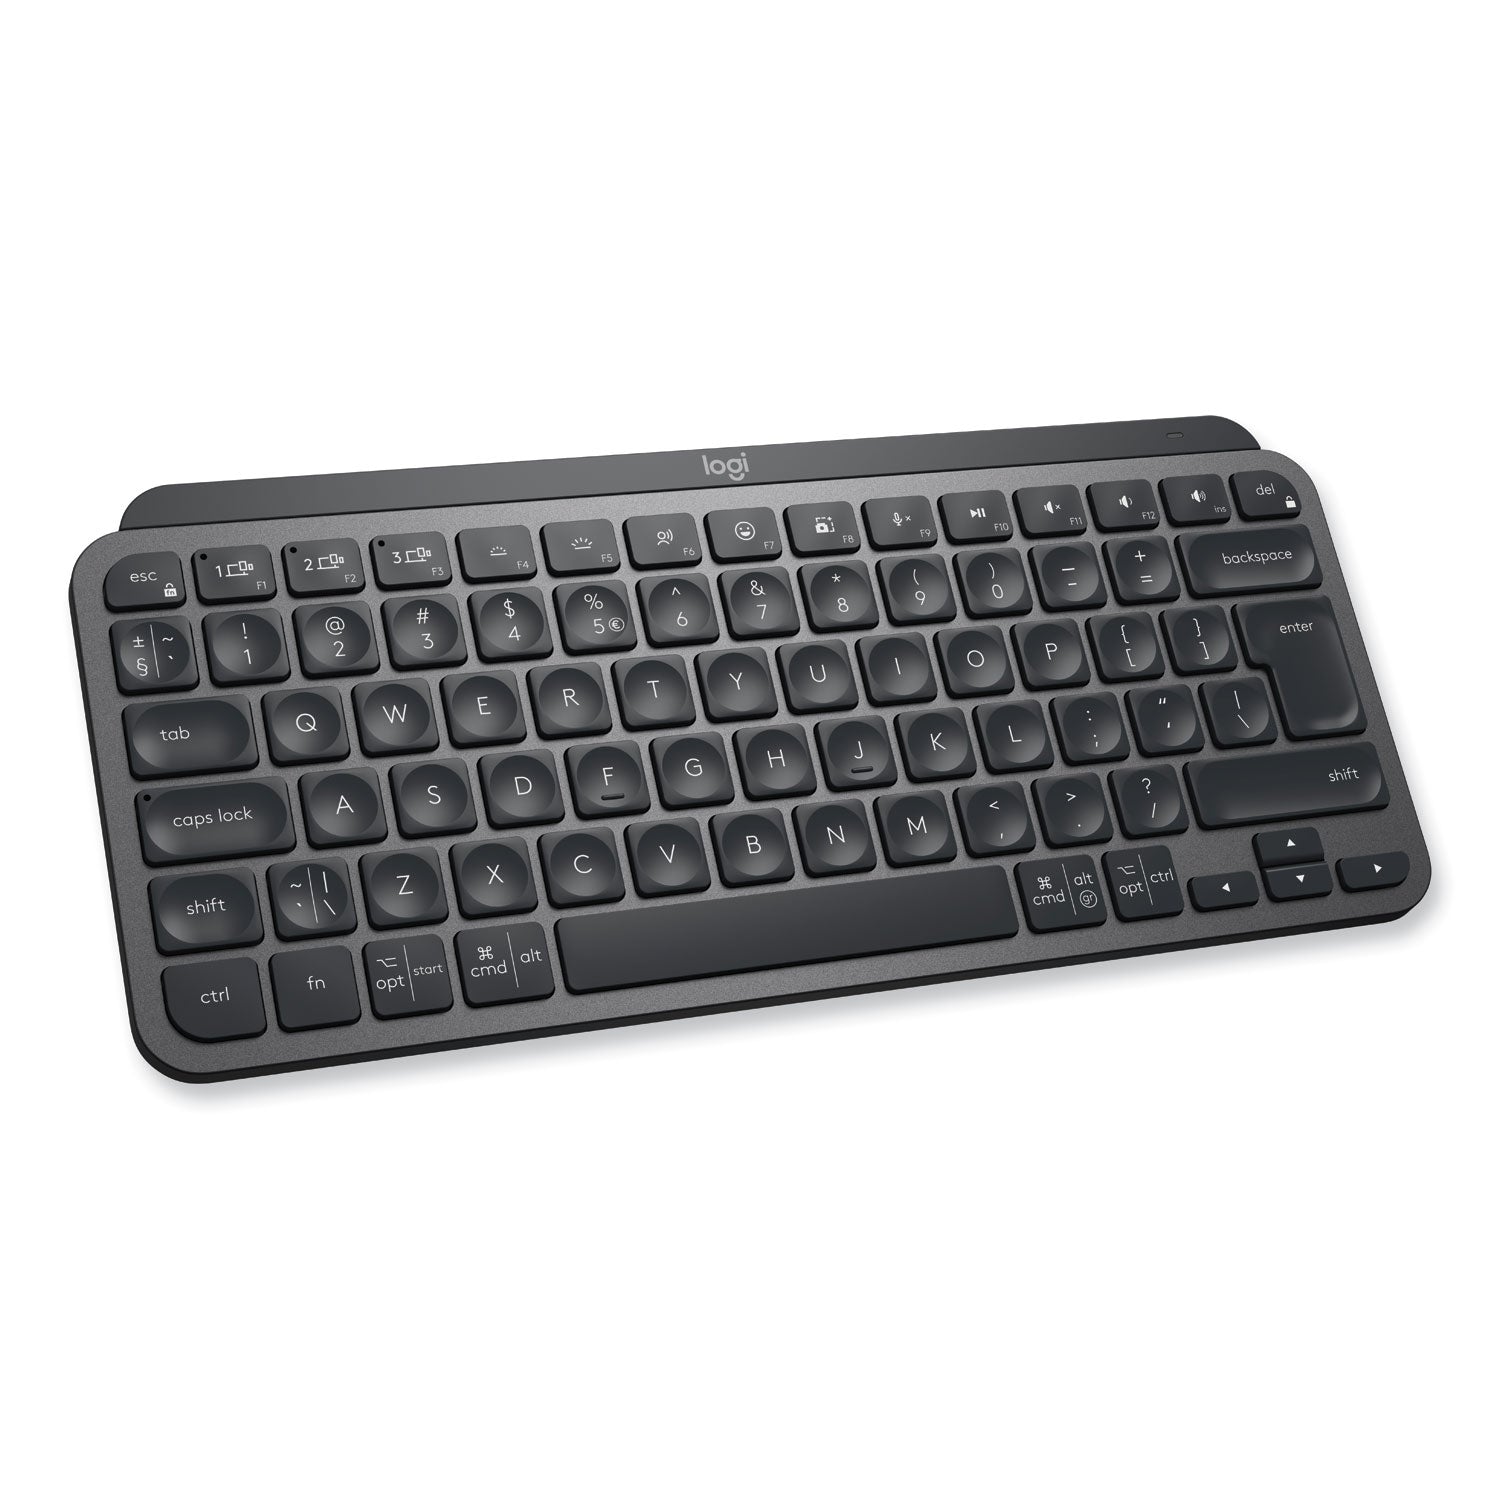 mx-keys-mini-combo-for-business-wireless-keyboard-and-mouse-24-ghz-frequency-32-ft-wireless-range-graphite_log920011048 - 3